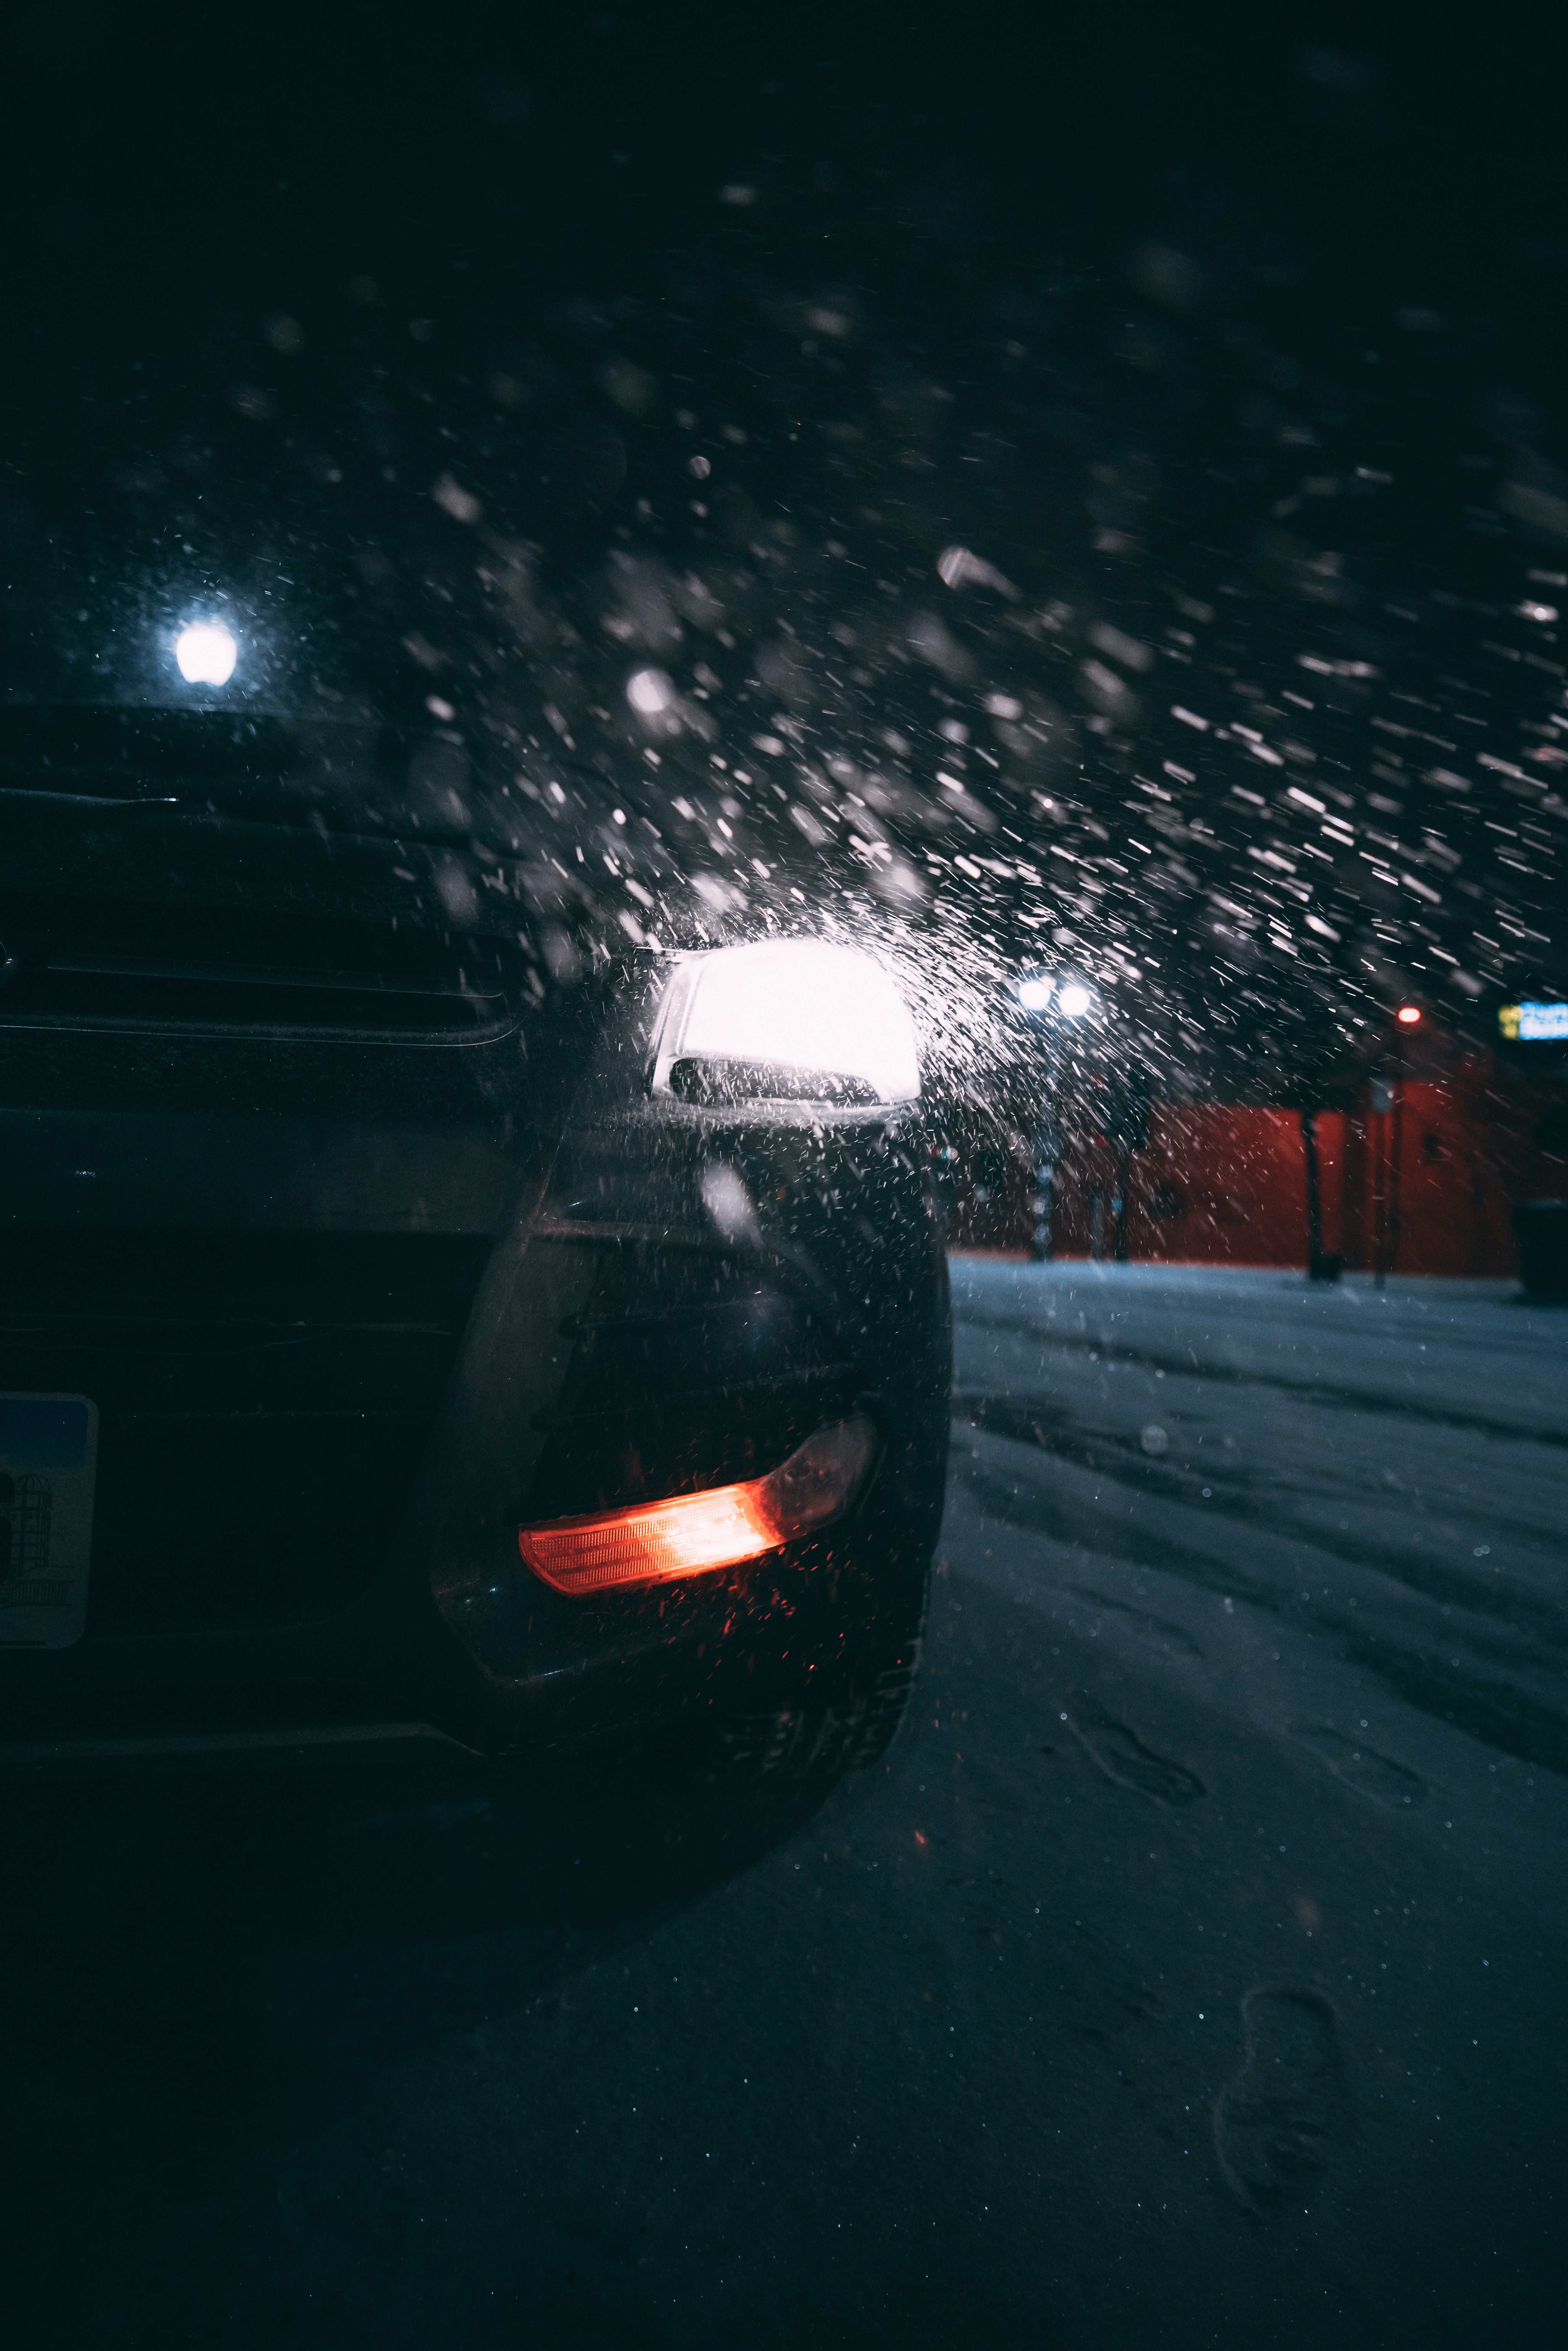 night, snow, cars, lights, car, back view, rear view, headlights Image for desktop